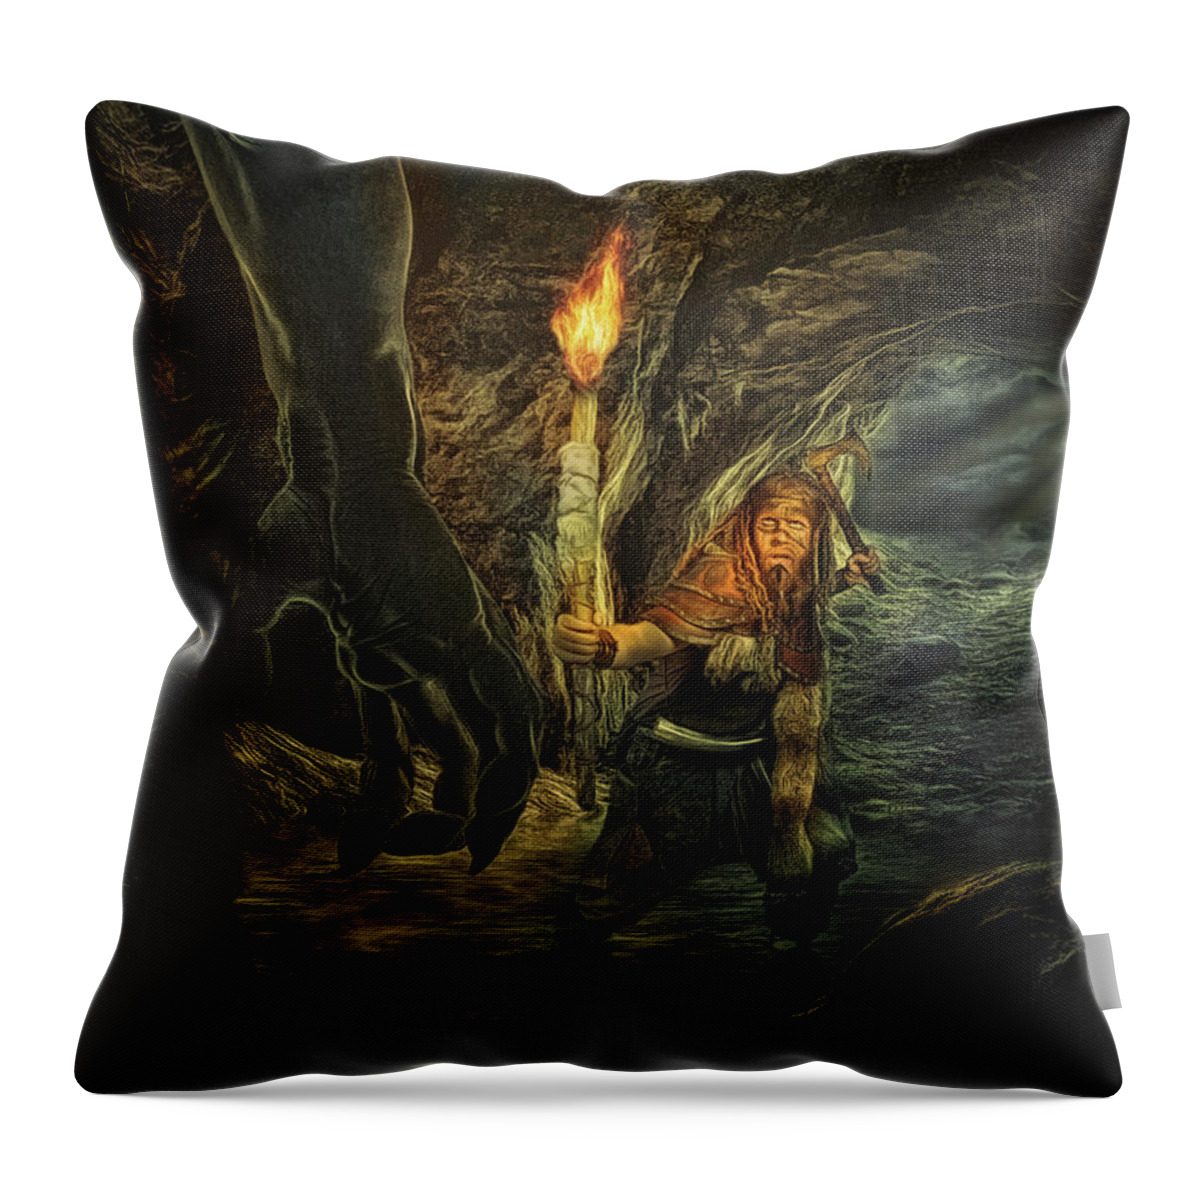 Beowulf Throw Pillow featuring the digital art Beowulf by Brad Barton